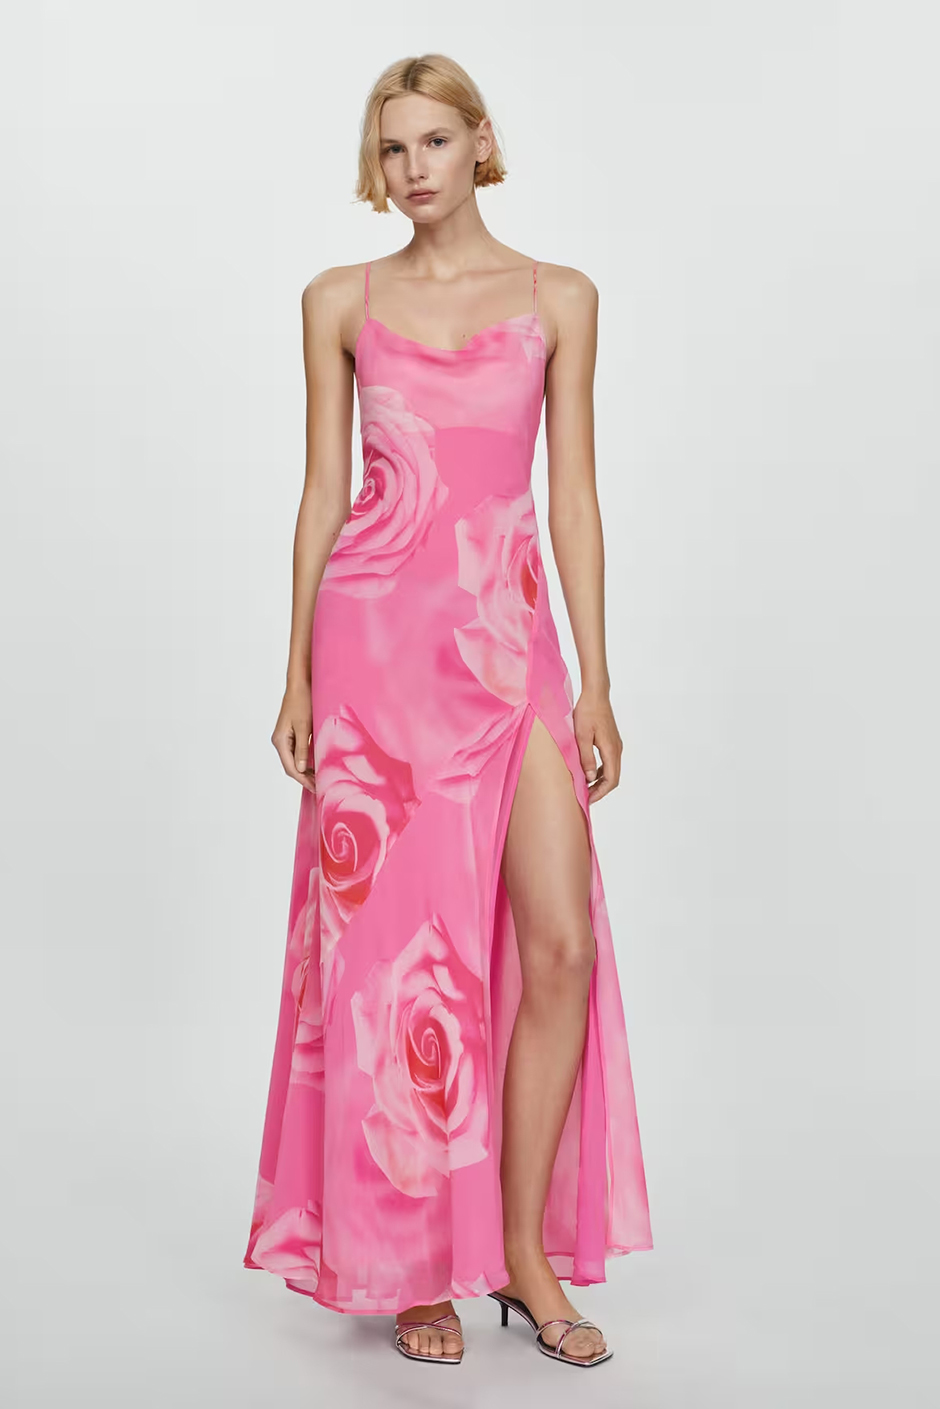 Pink wedding guest dress from Mango with floral design and leg split 